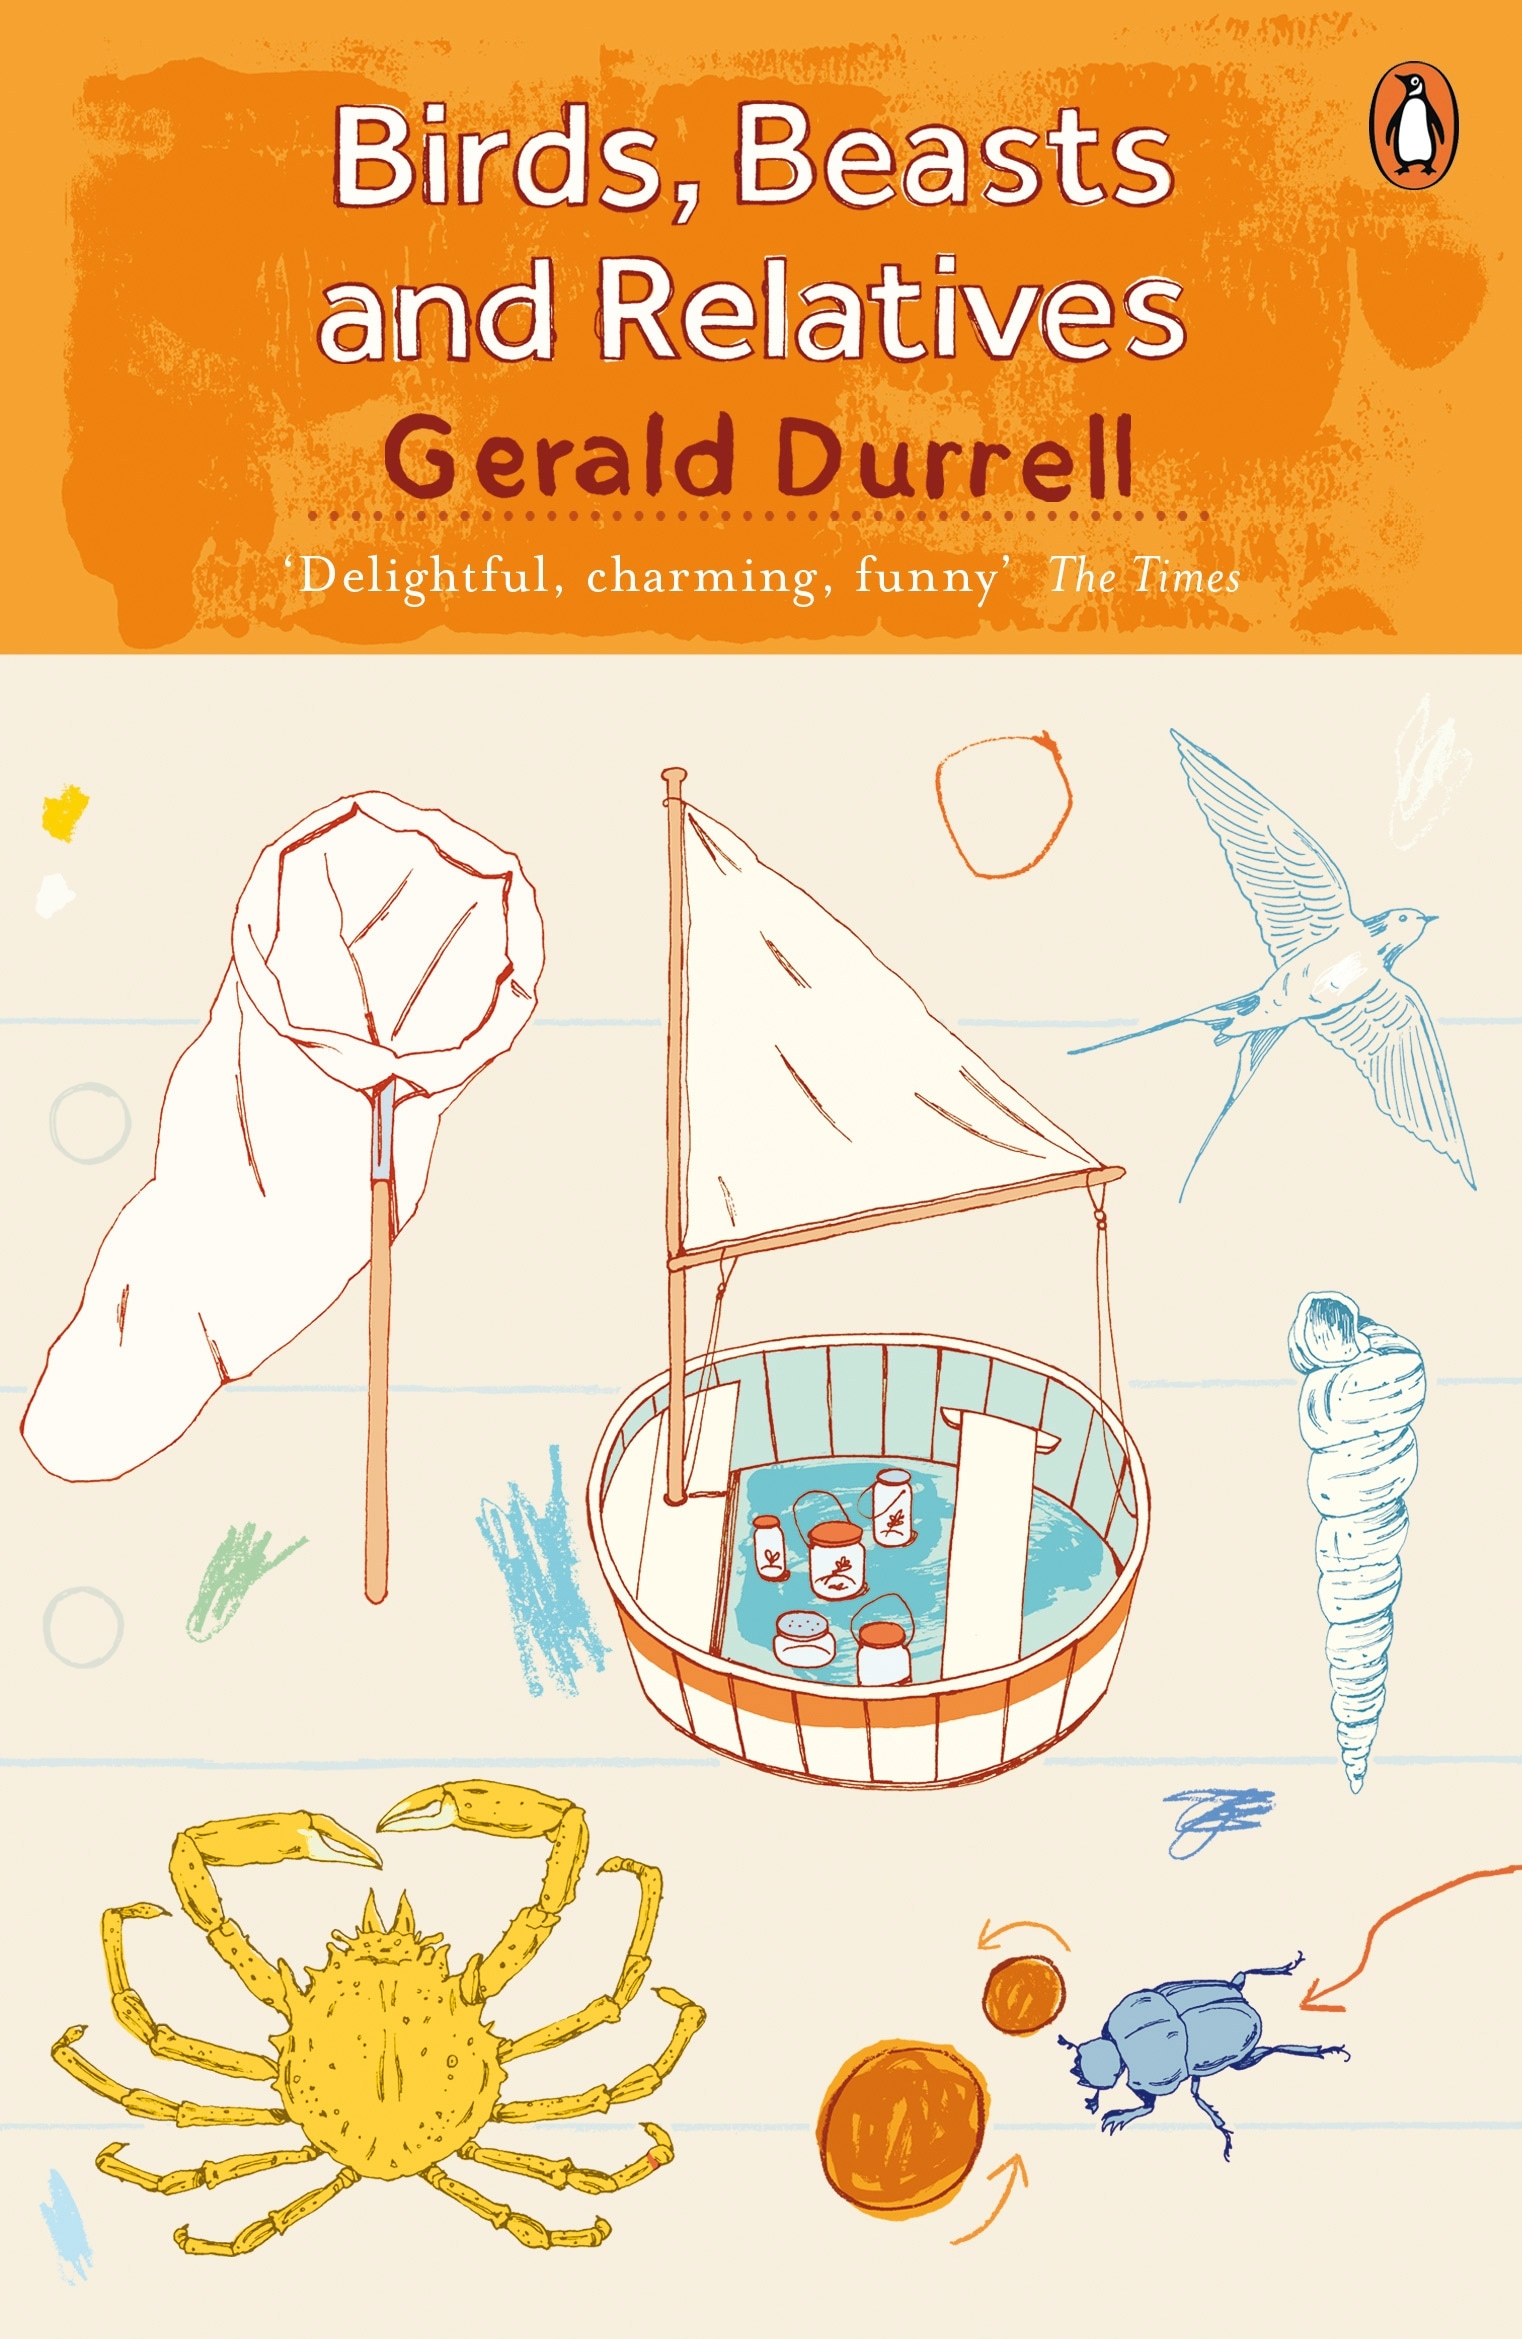 Book “Birds, Beasts and Relatives” by Gerald Durrell — April 6, 2017